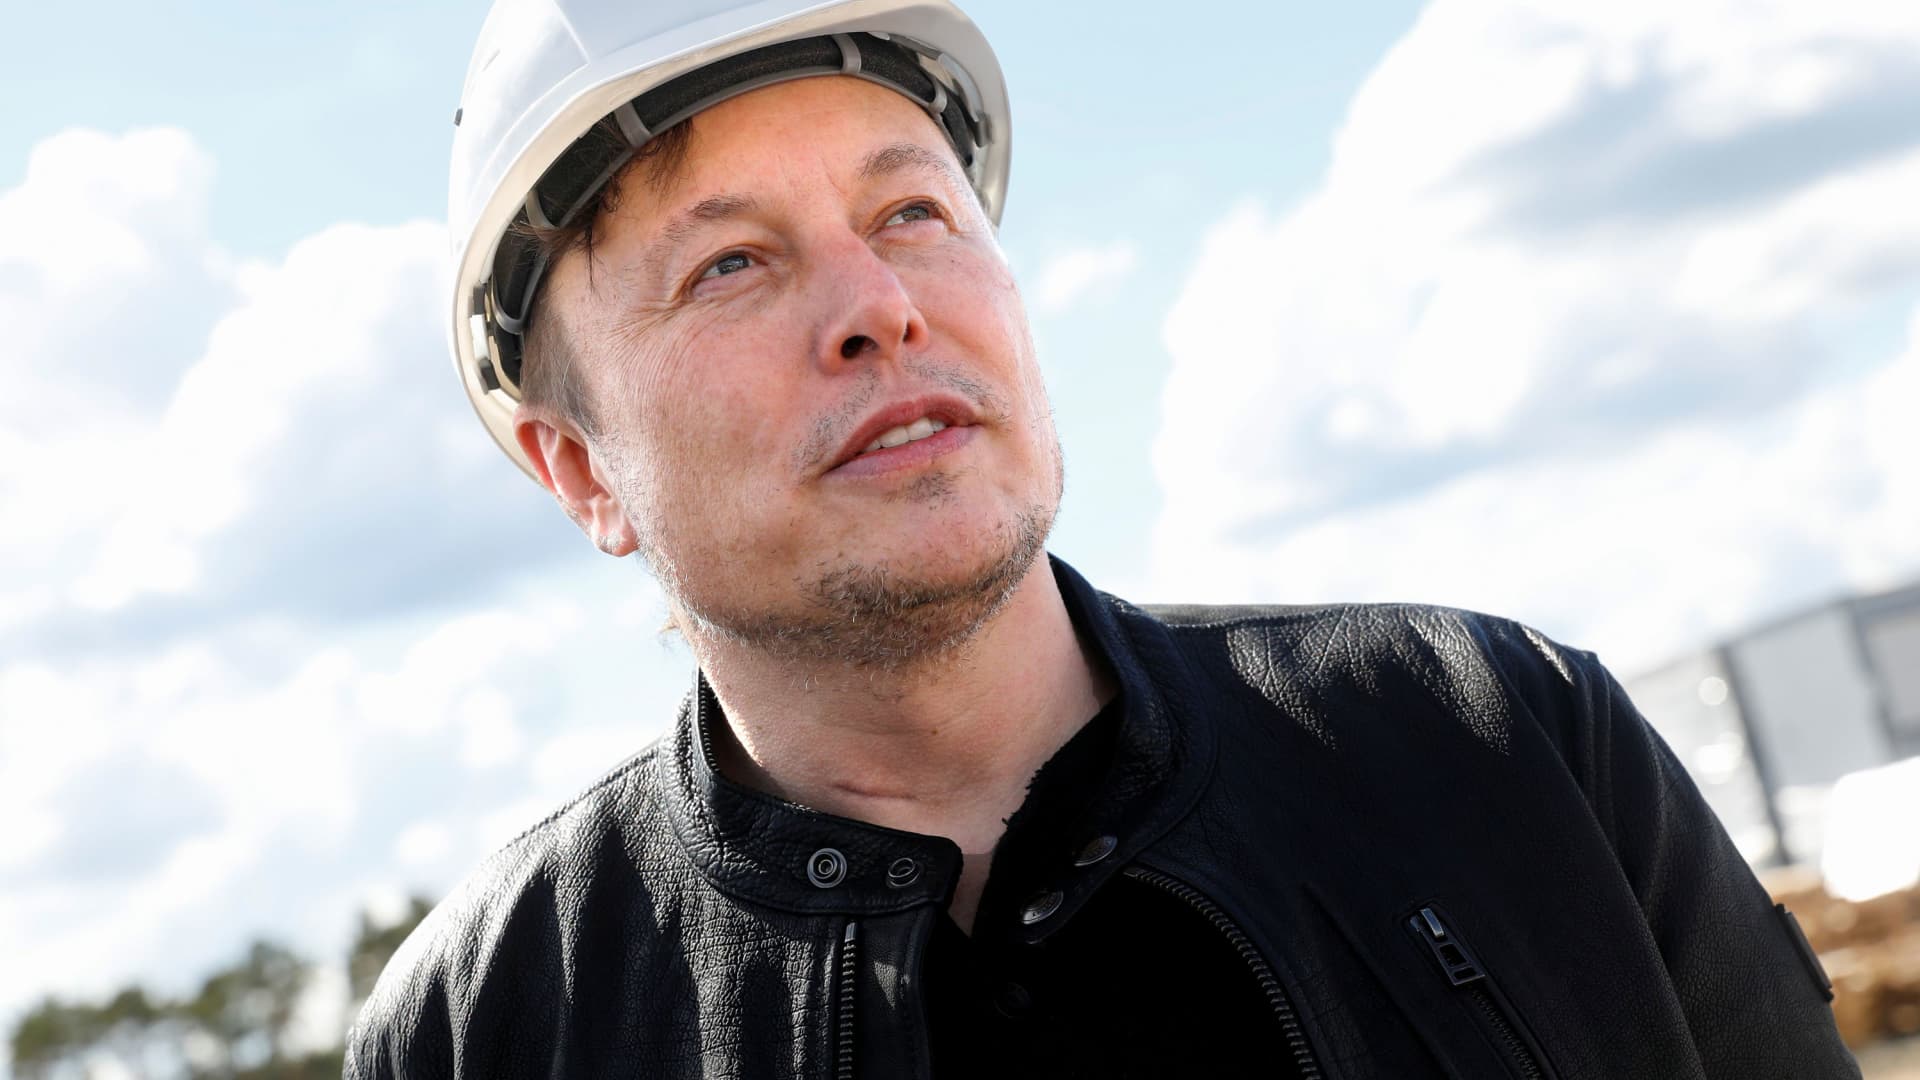 Elon Musk warns Twitter that he is terminating the agreement